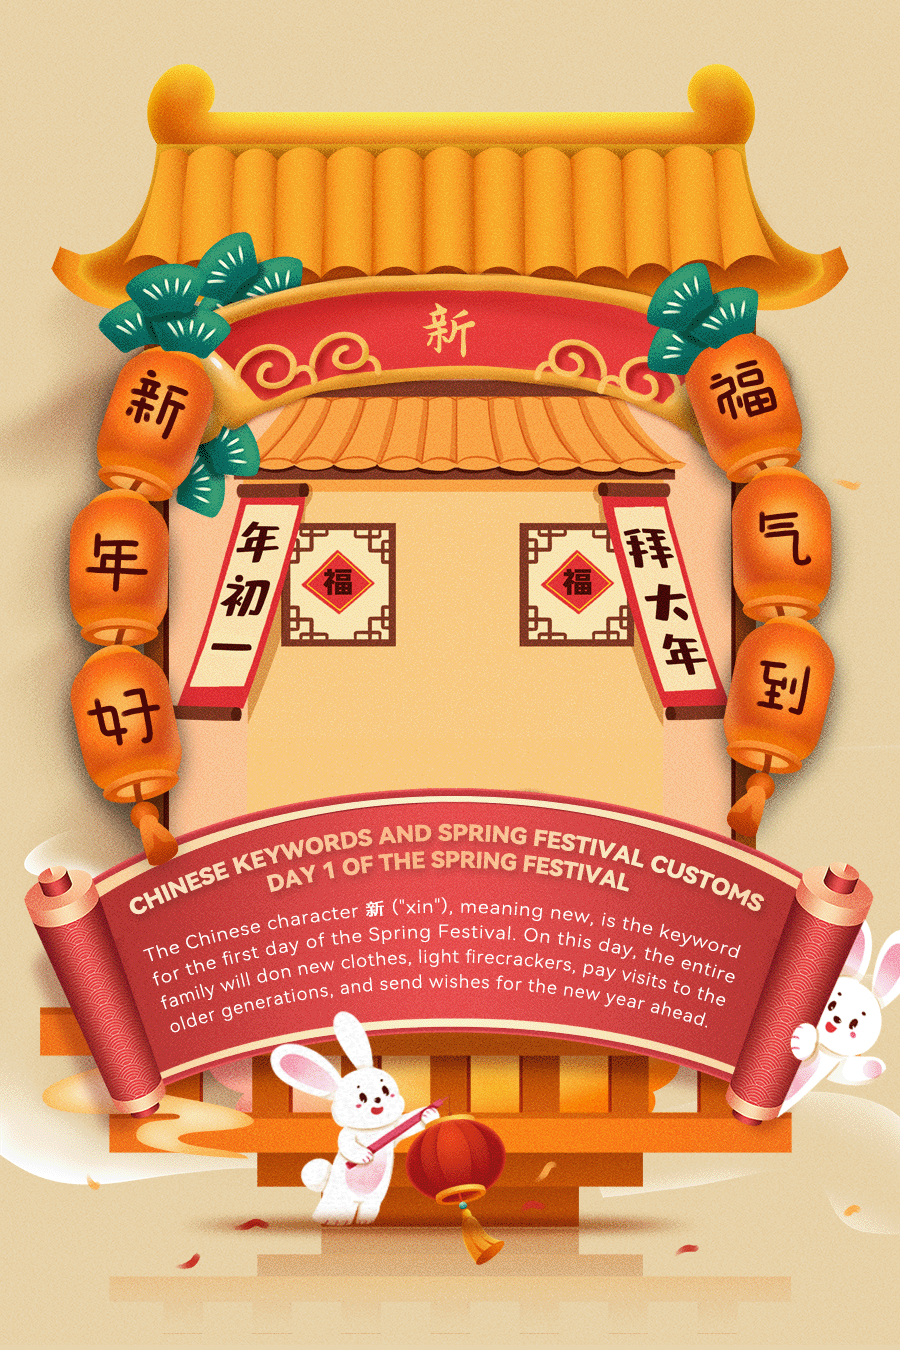 Chinese keywords and Spring Festival countdown customs (6 days